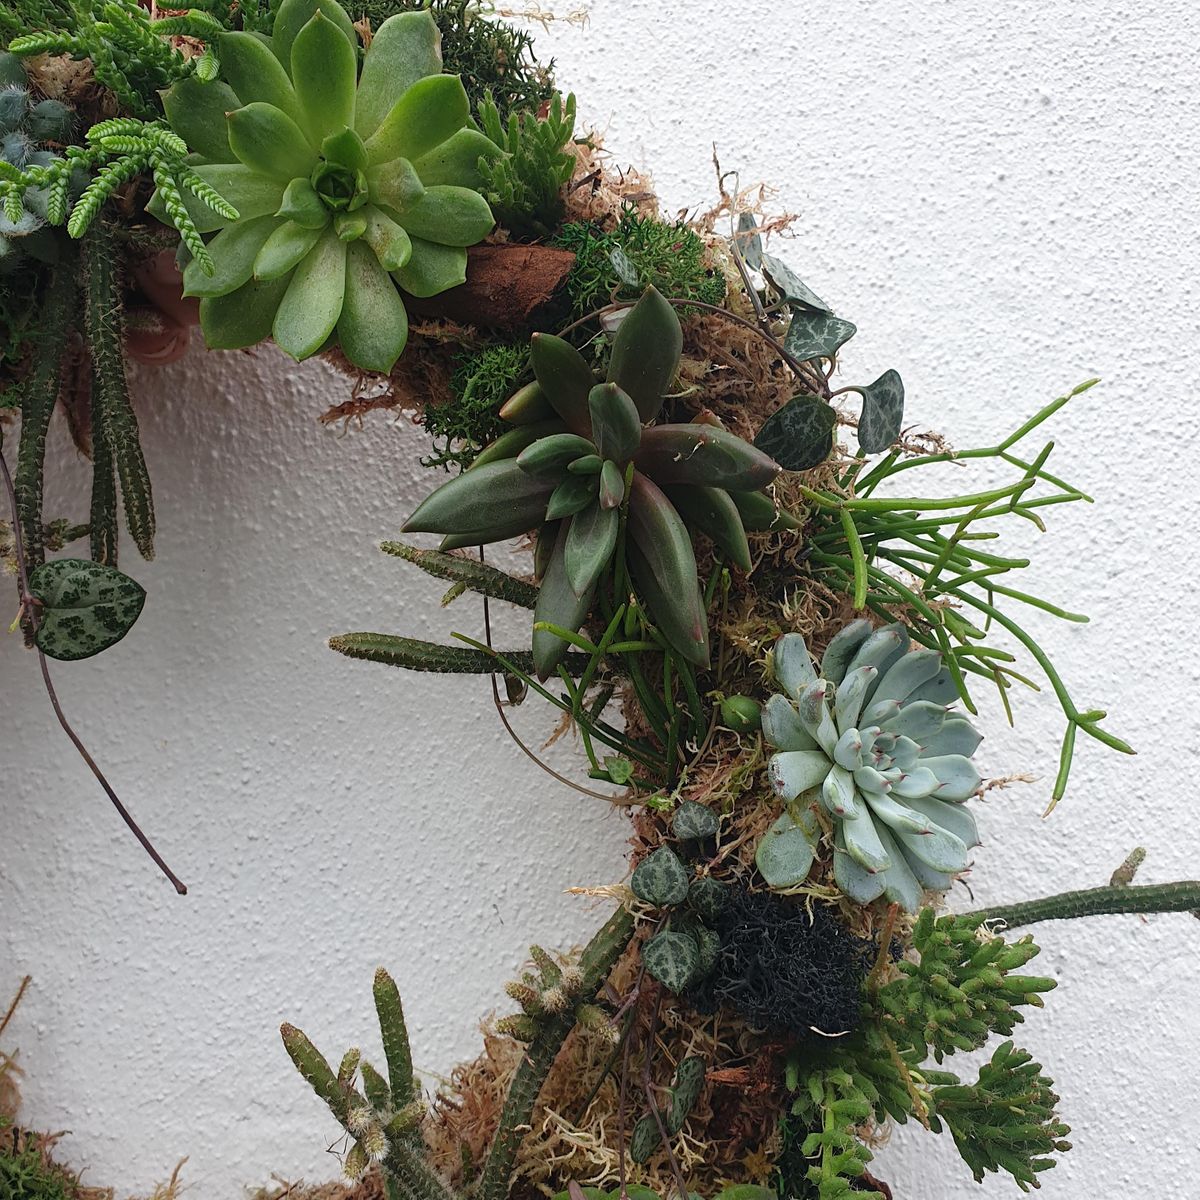 Living wreath making with succulents